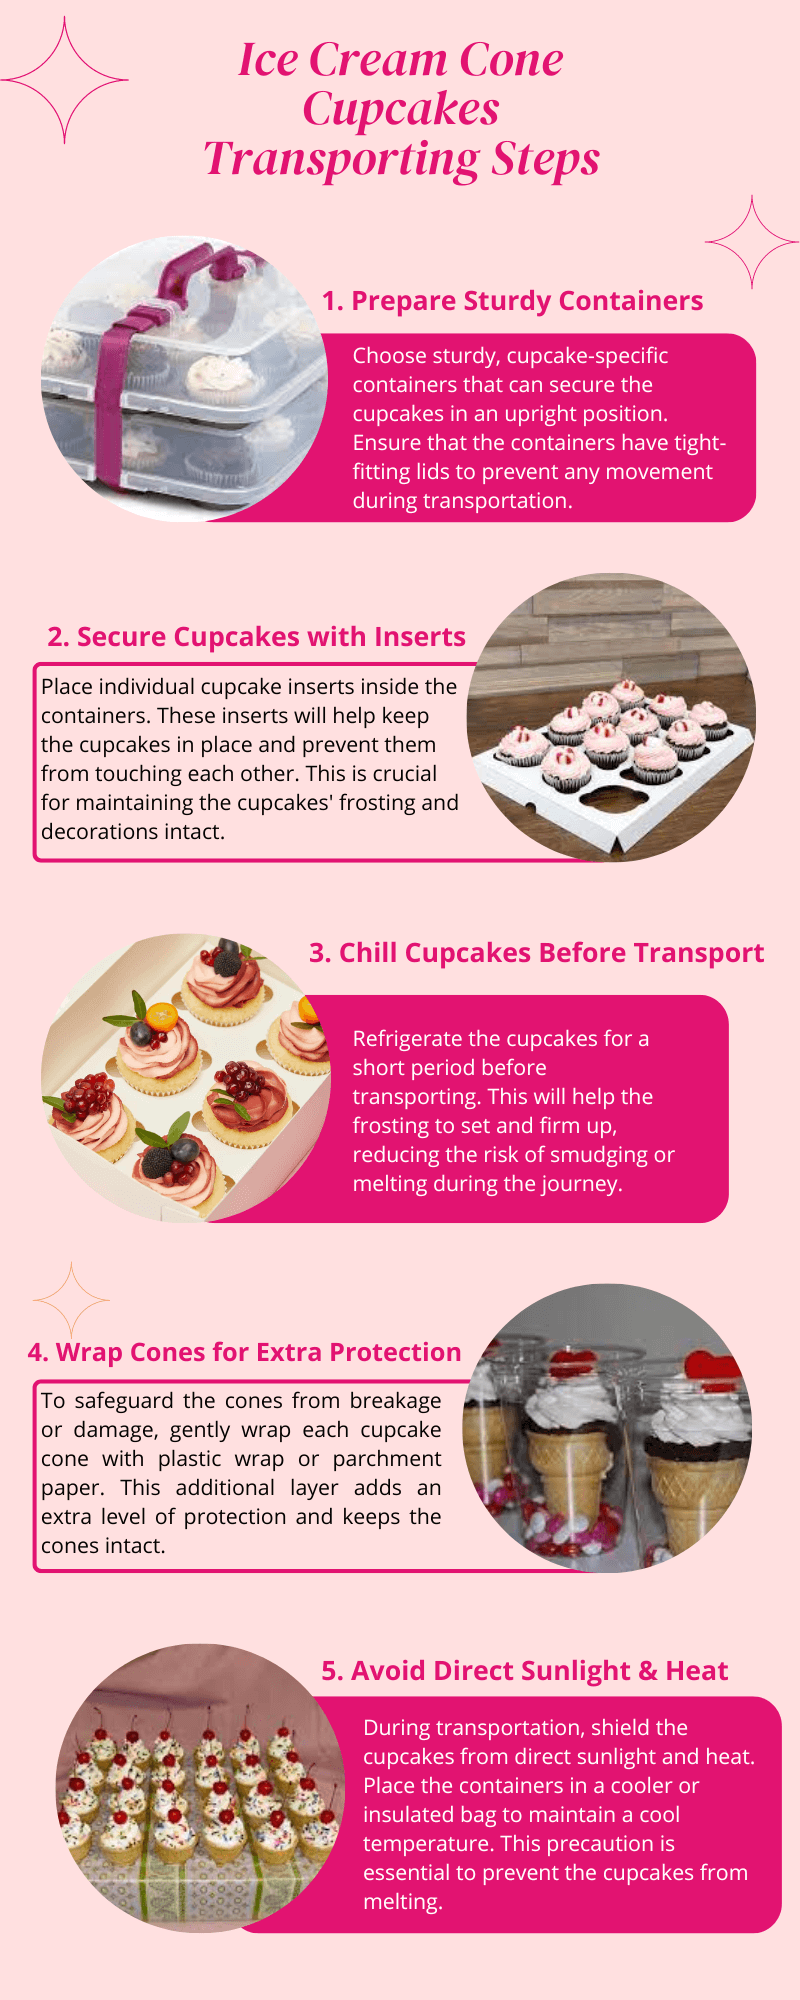 Ice Cream Cone Cupcakes Transporting Steps